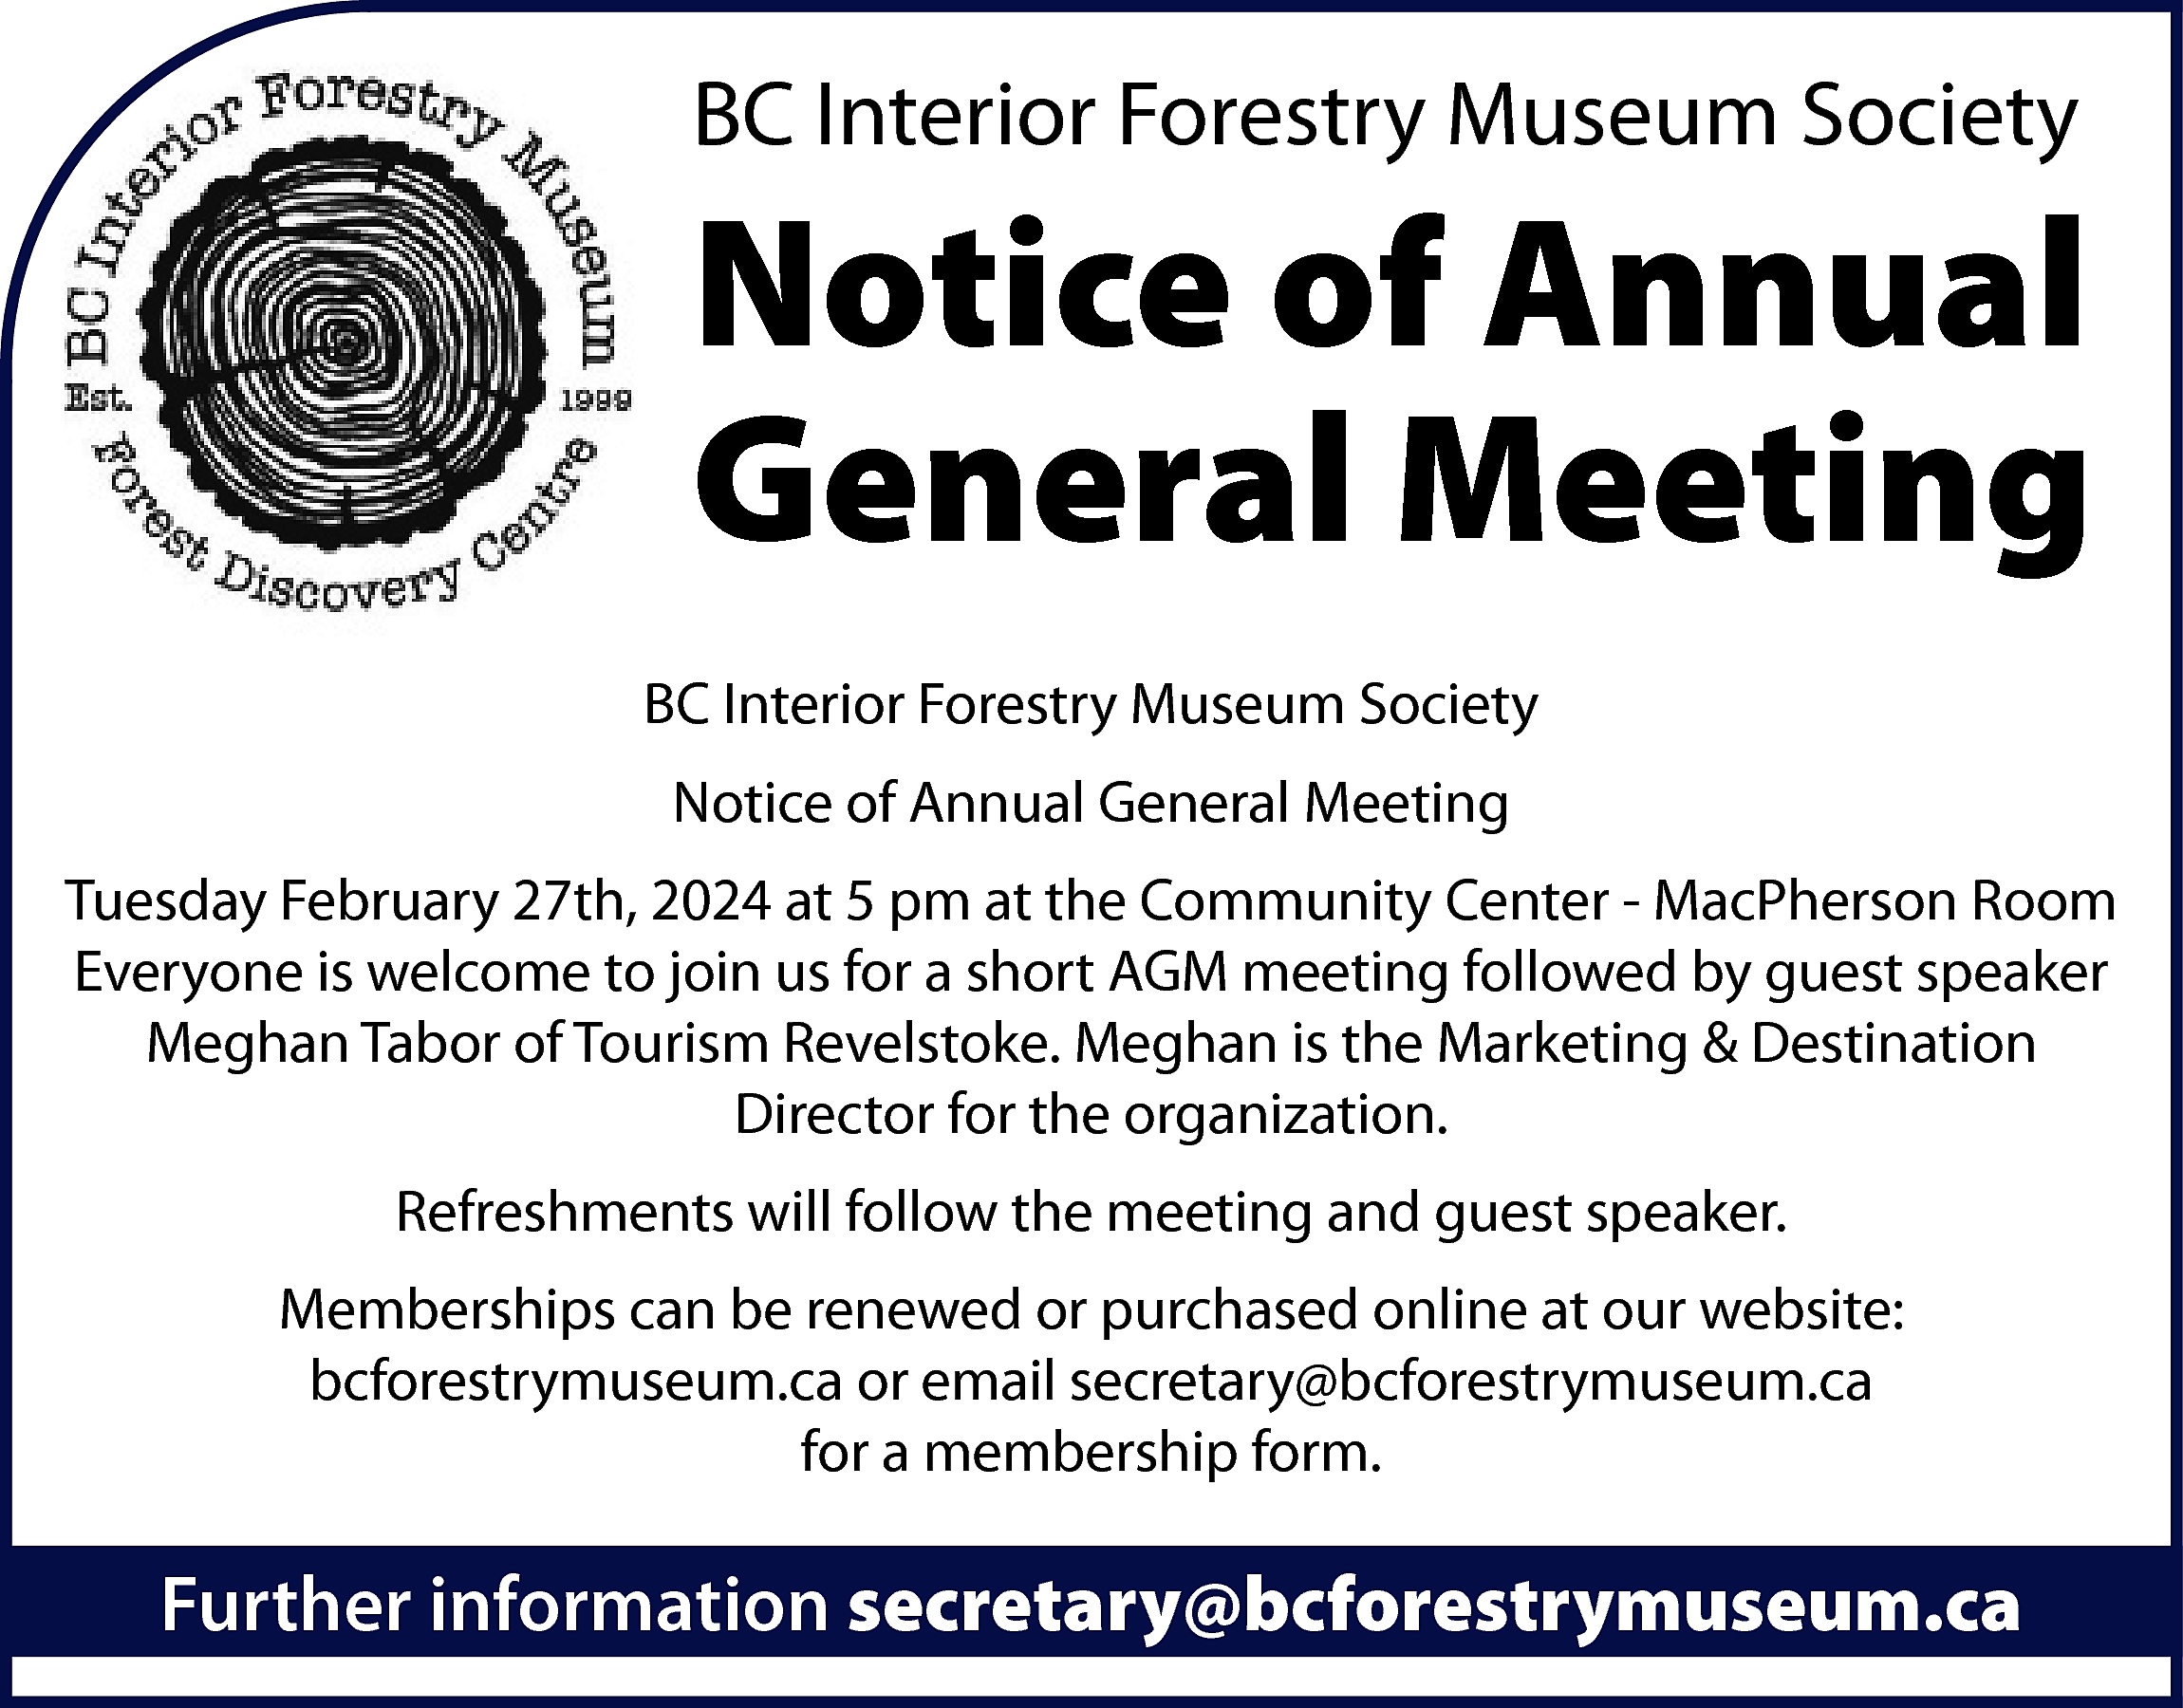 BC Interior <br>Interior Forestry <br>ForestryMuseum  BC Interior  Interior Forestry  ForestryMuseum  MuseumSociety  Society    Notice  Notice of  of Annual  Annual  Meeting  General Meeting  BC  BCInterior  InteriorForestry  ForestryMuseum  MuseumSociety  Society  Notice  Noticeof  ofAnnual  AnnualGeneral  GeneralMeeting  Meeting    Tuesday  pm at the Community Center - MacPherson Room  TuesdayFebruary  February27th,  28th,2024  2023atat55:30  Everyone is welcome to join us for a short AGM meeting followed by guest speaker  Everyone is welcome to join us for a short AGM meeting followed by guest speaker  Meghan Tabor of Tourism Revelstoke. Meghan is the Marketing & Destination  Jim Cullen. Jim Cullen is the Executive Director of the Revelstoke Railway Museum  Director for the organization.  with years of experience in the Heritage sector.  Refreshments will follow the meeting and guest speaker.  Refreshments will follow the meeting and guest speaker.  www.bcforestrymuseum.ca  Memberships can be renewed or purchased online at our website:  Memberships can be renewed or purchased online at our website:  bcforestrymuseum.ca or email secretary@bcforestrymuseum.ca  bcforestrymuseum.ca or email secretary@bcforestrymuseum.ca  for a membership form.  for a membership form.    Further  information secretary@bcforestrymuseum.ca  secretary@bcforestrymuseum.ca  Further  information    